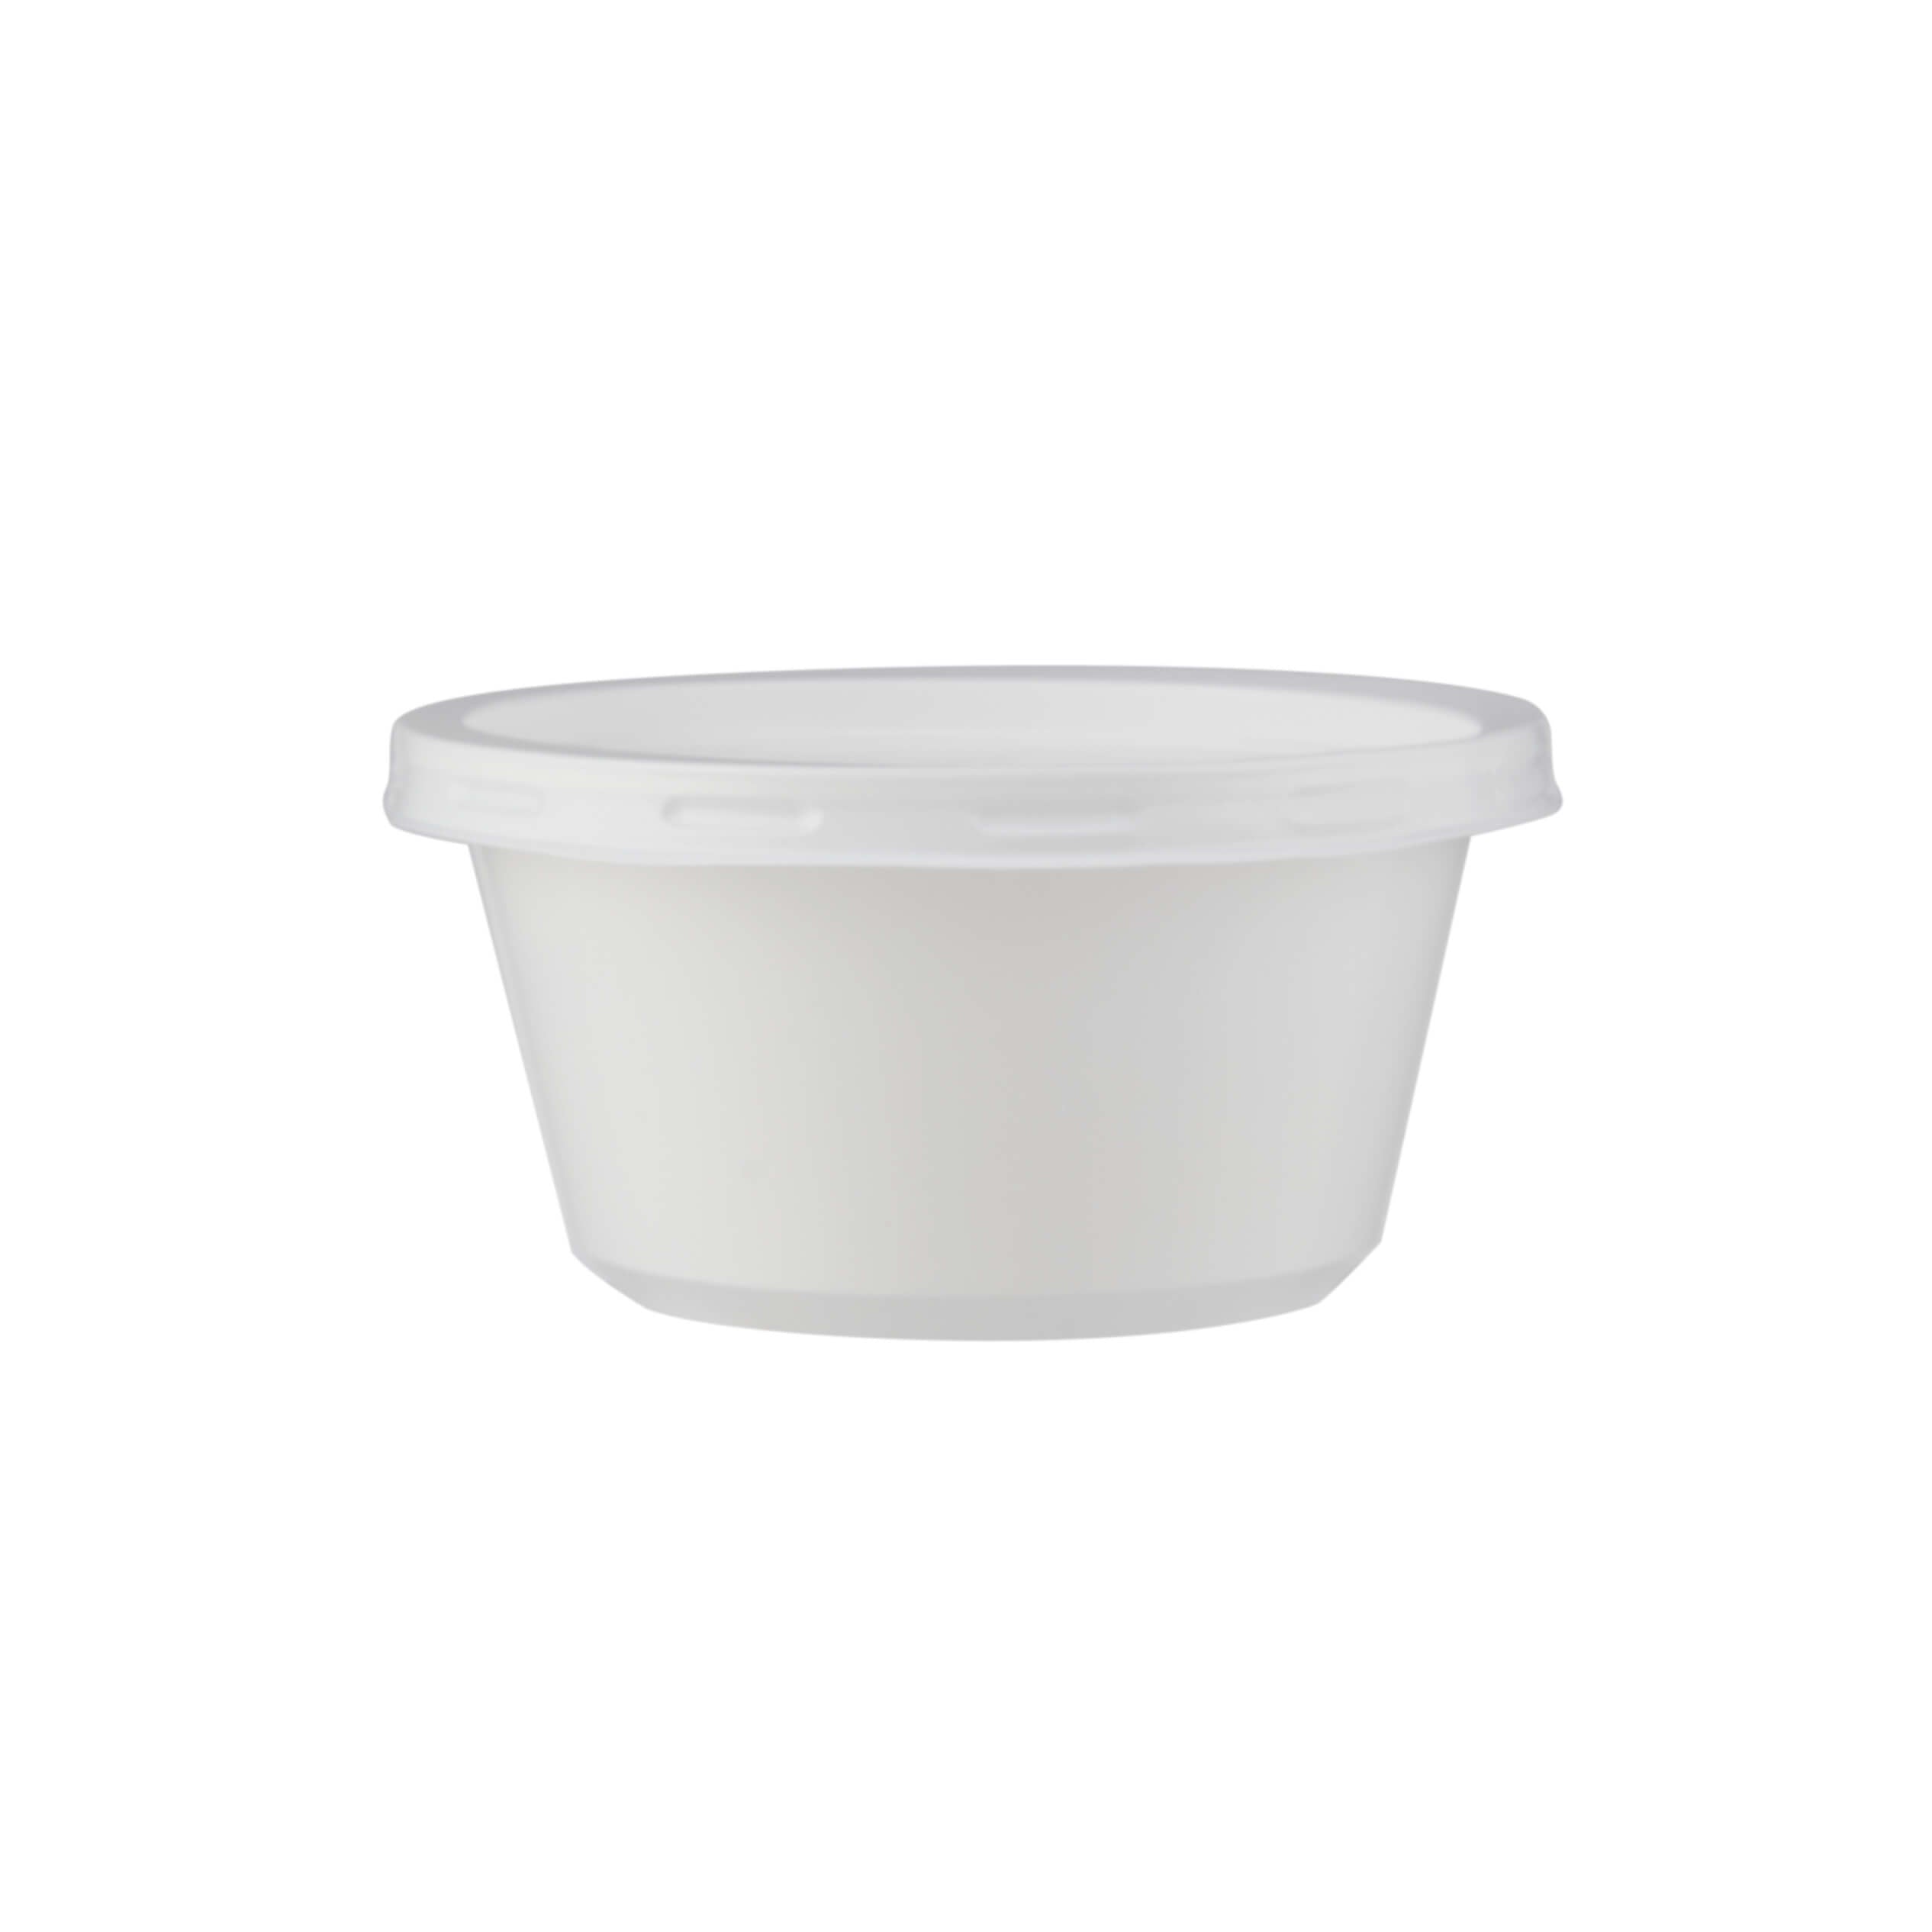 Plastic White Bowl 225ml With Lid 25 Pieces + Plastic White Bowl 400ml With Lid 25 Pieces 27th Anniversary Combo - hotpackwebstore.com